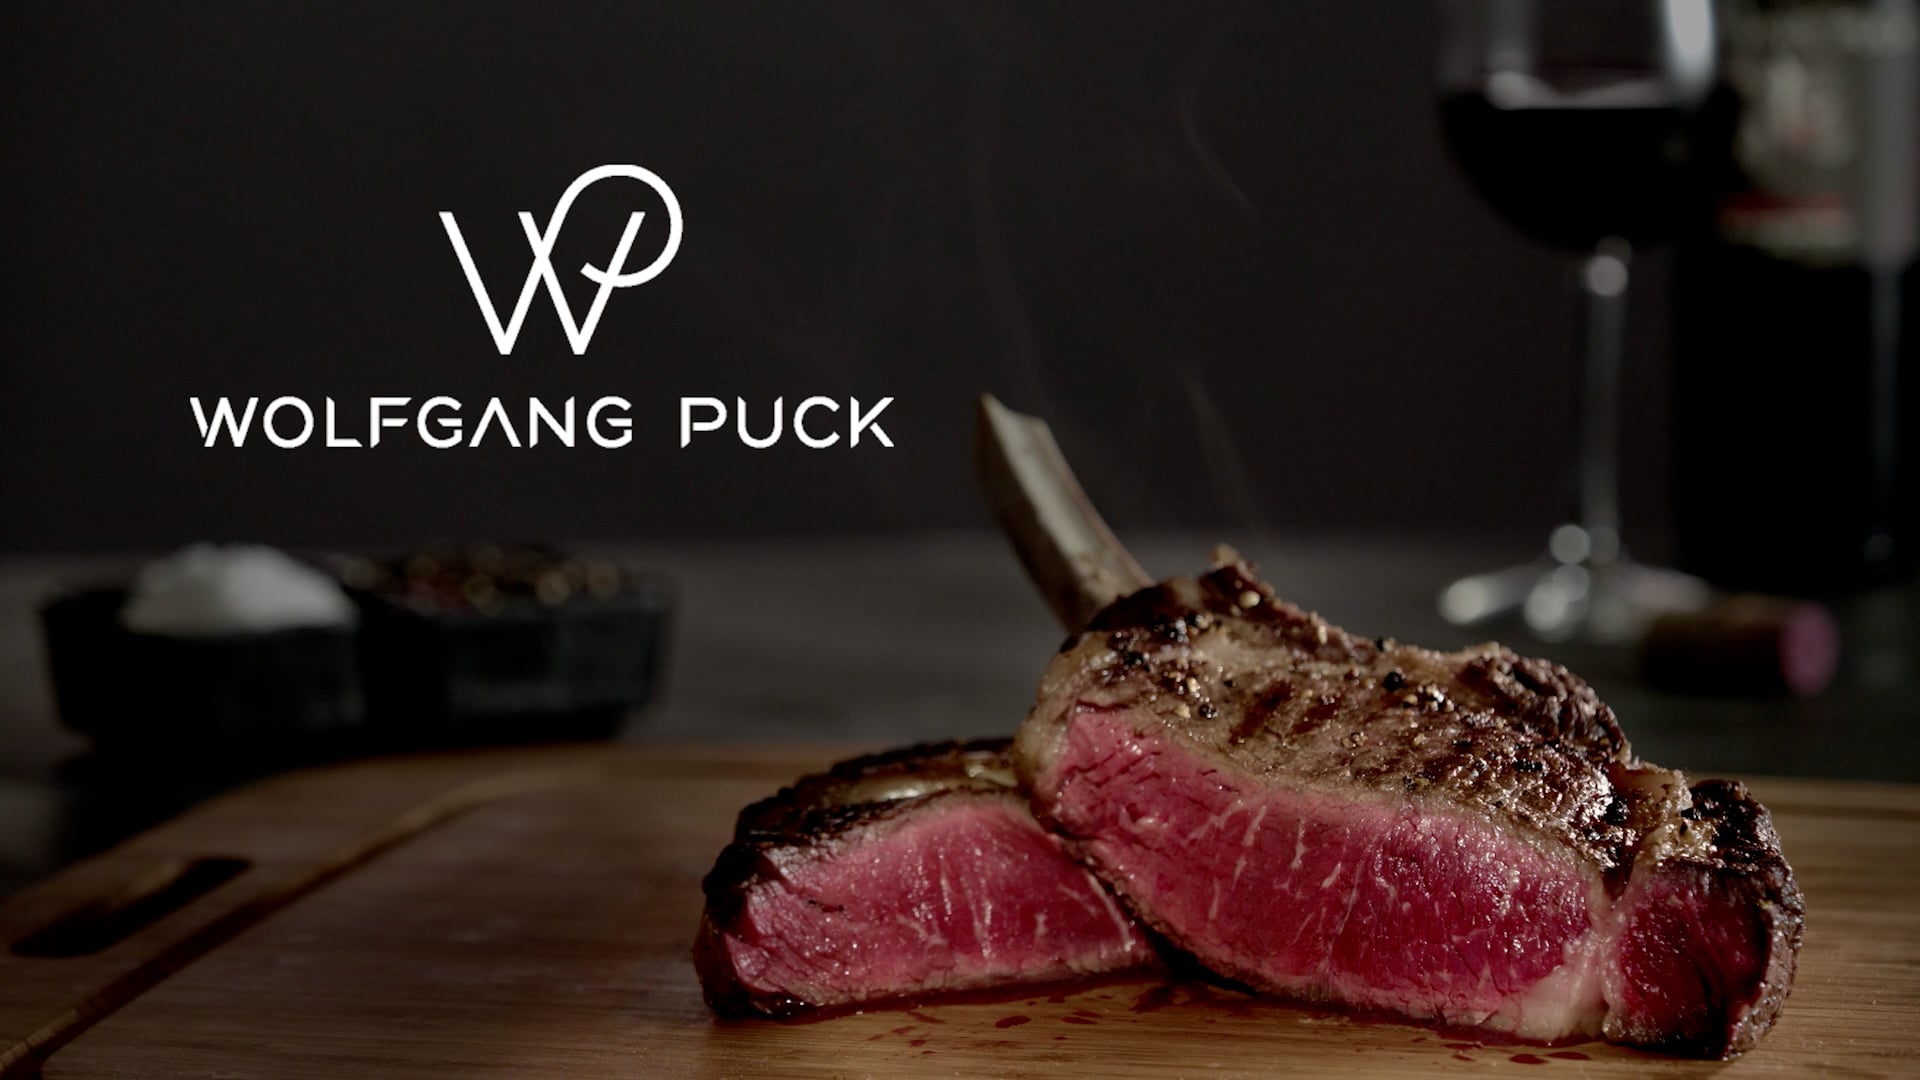 WOLFGANG PUCK / wine & meat